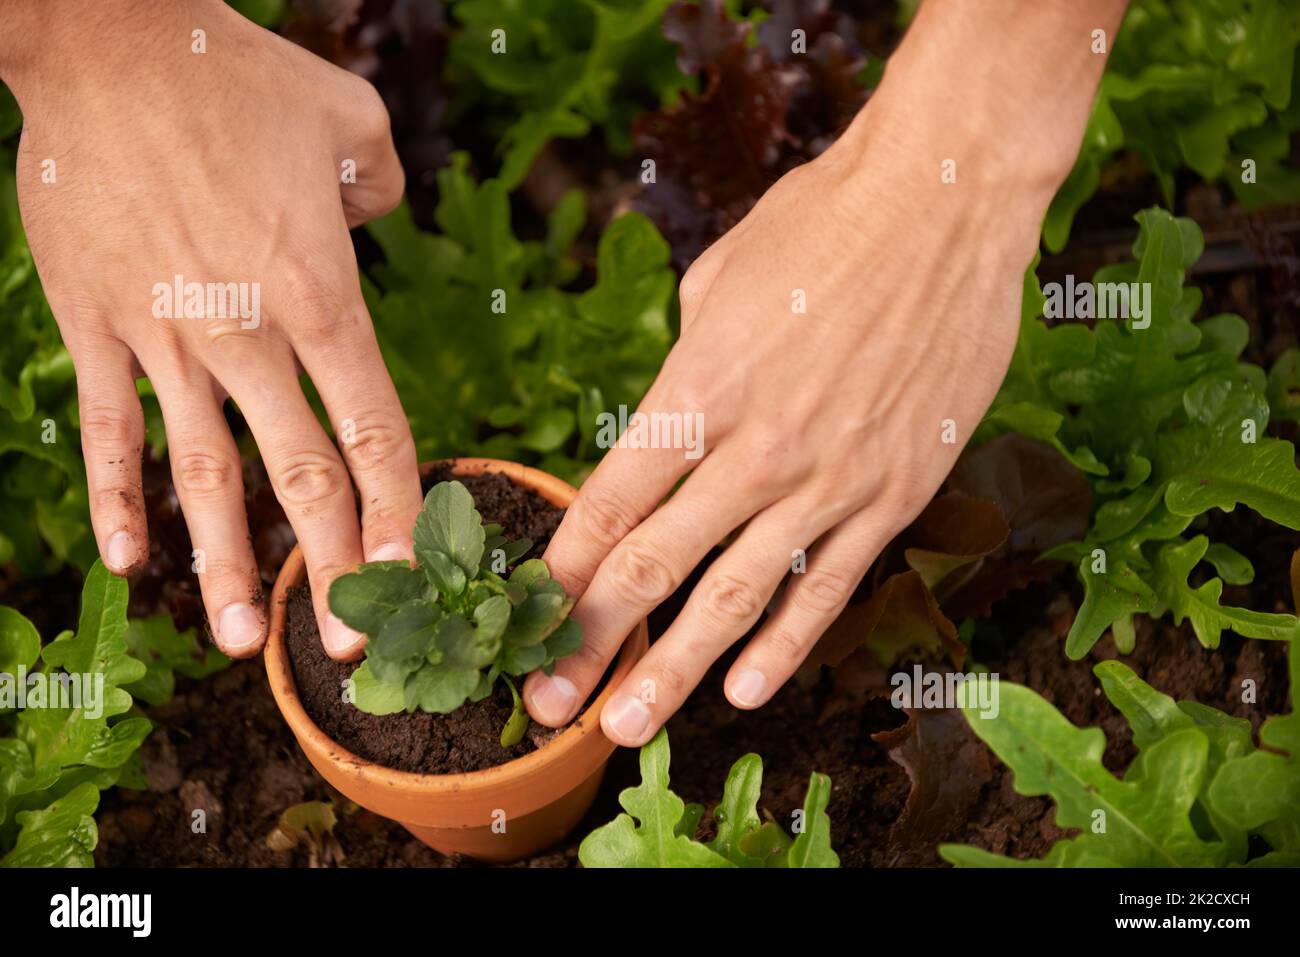 Getting his fingers dirty. Cropped shot of a man hands planting some leafy vegetables in a garden box. Stock Photo